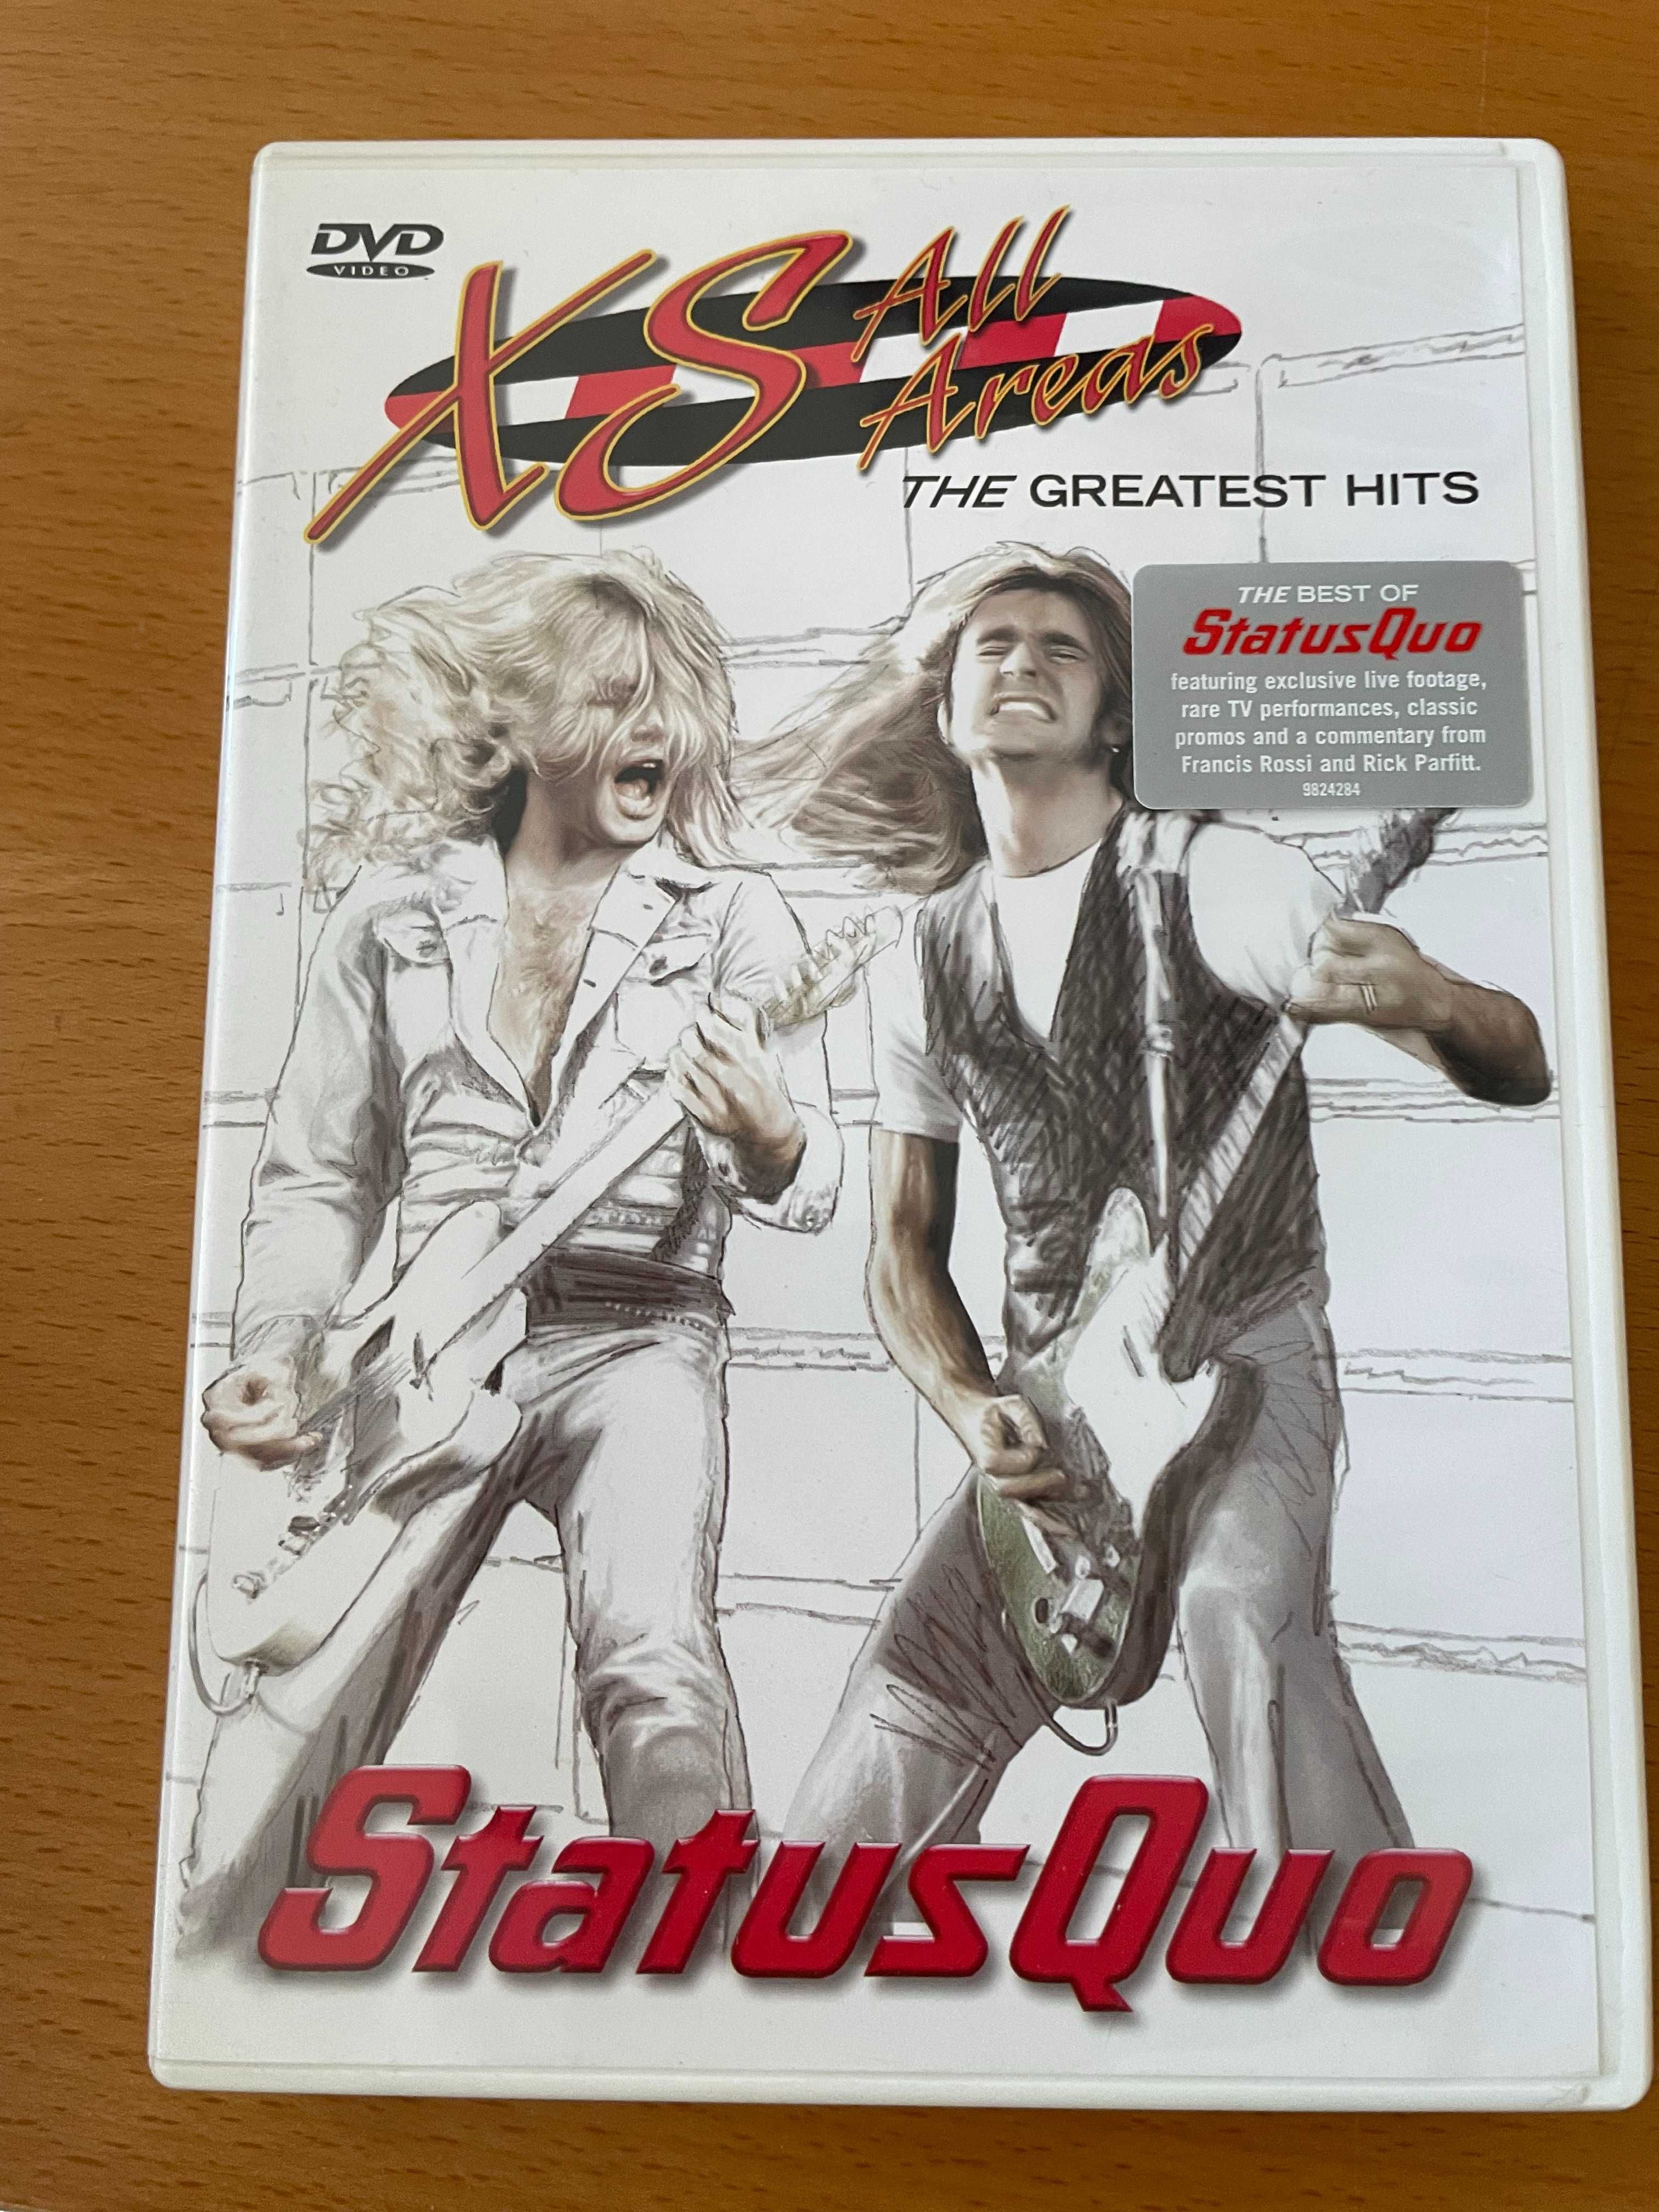 Koncert Status Quo: Xs All Areas The Greatest Hits płyta DVD